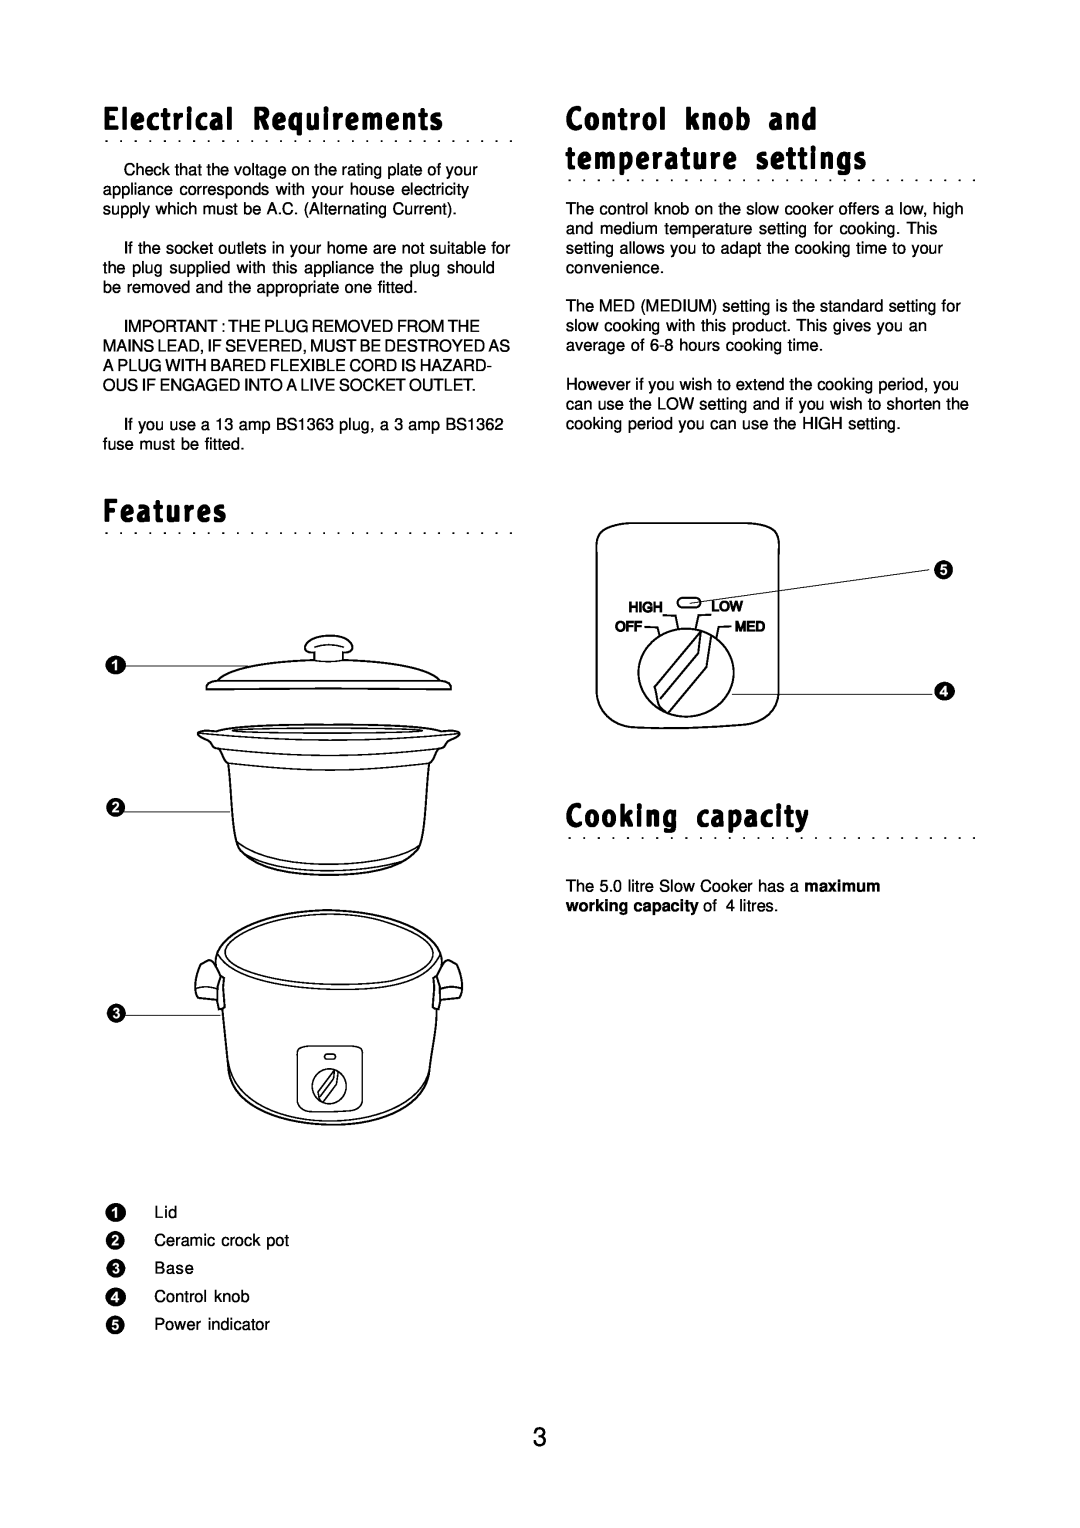 Morphy Richards Round slow cooker manual Electrical Requirements, Features Cooking capacity 